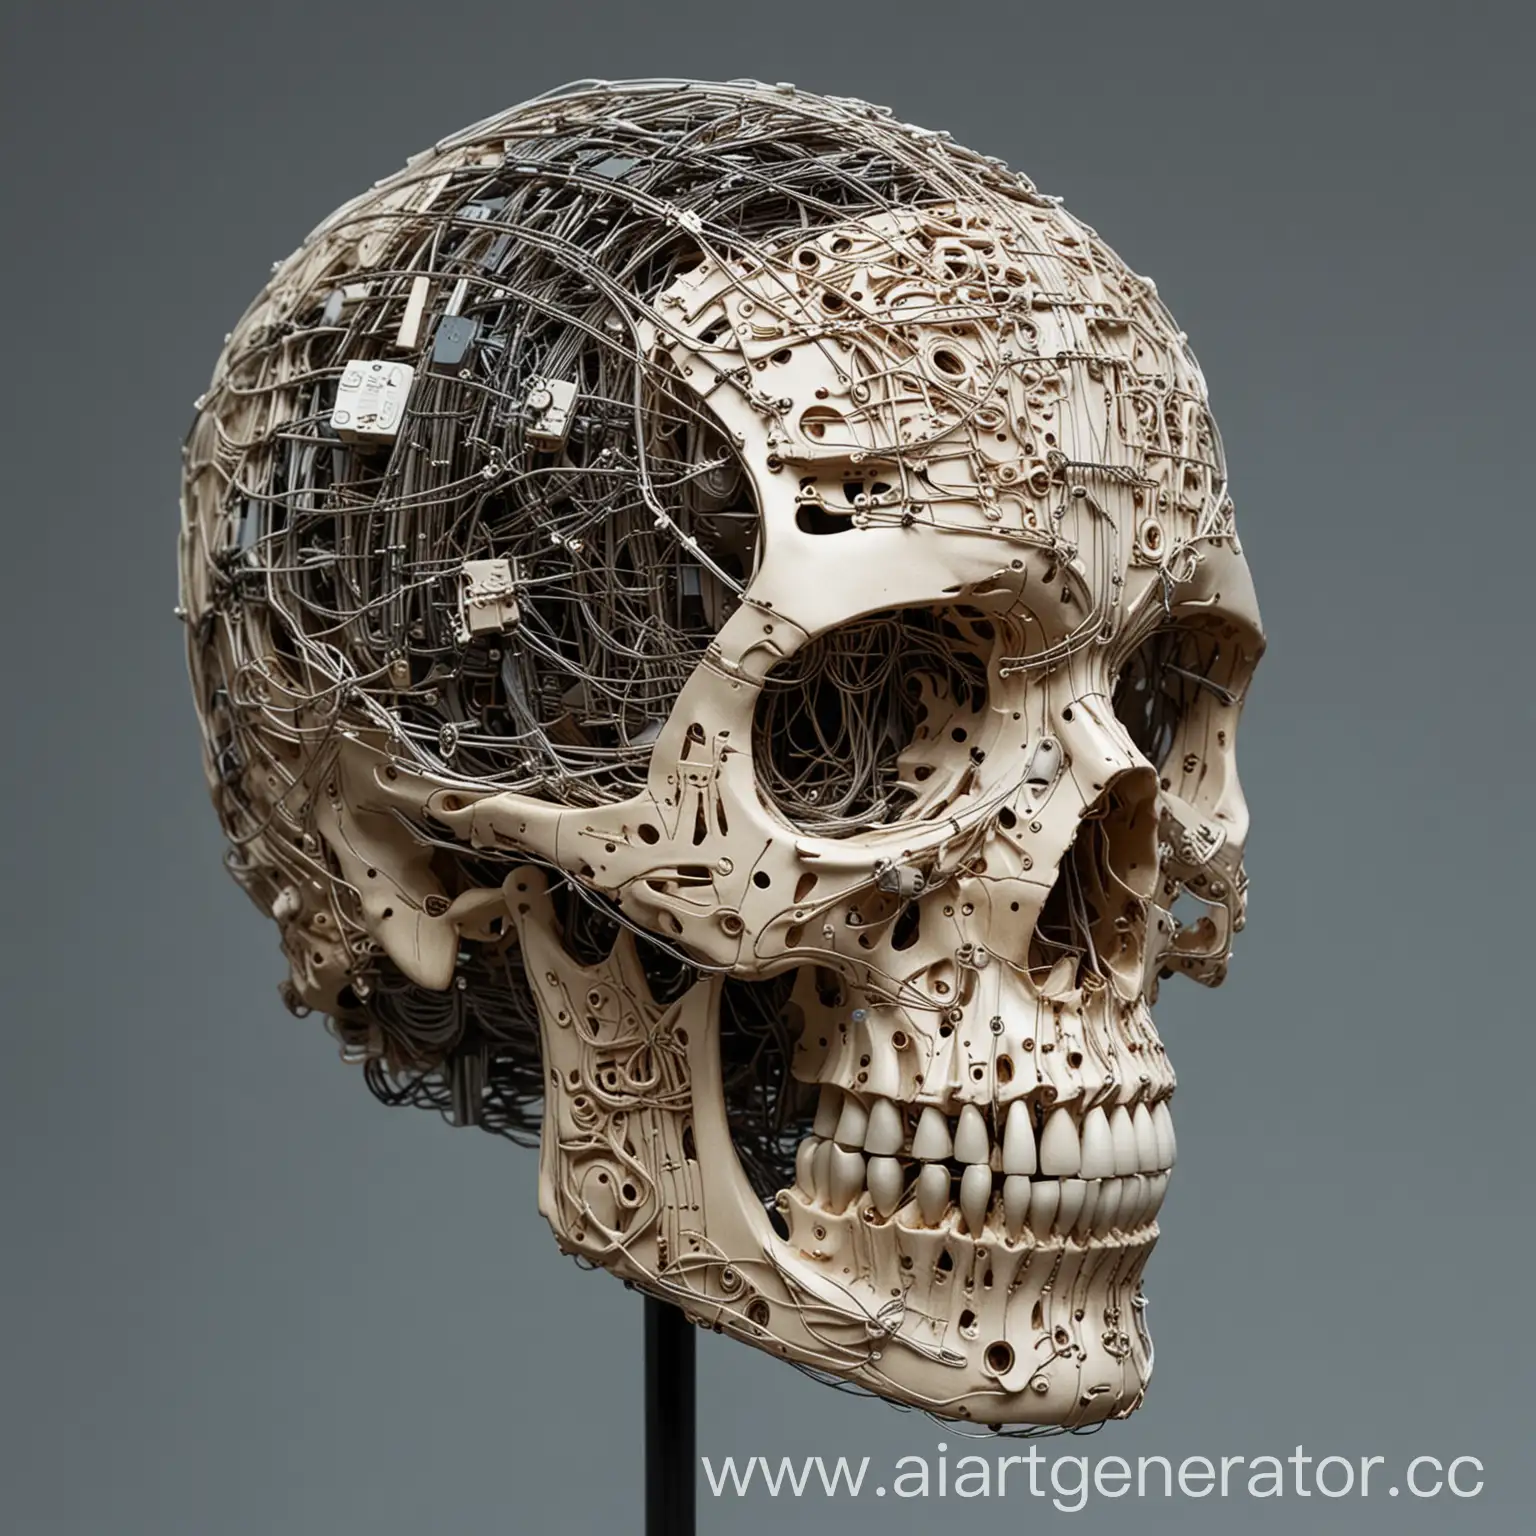 Innovative-AI-Da-Vinci-Skull-Model-Crafted-from-Wires-and-Chips